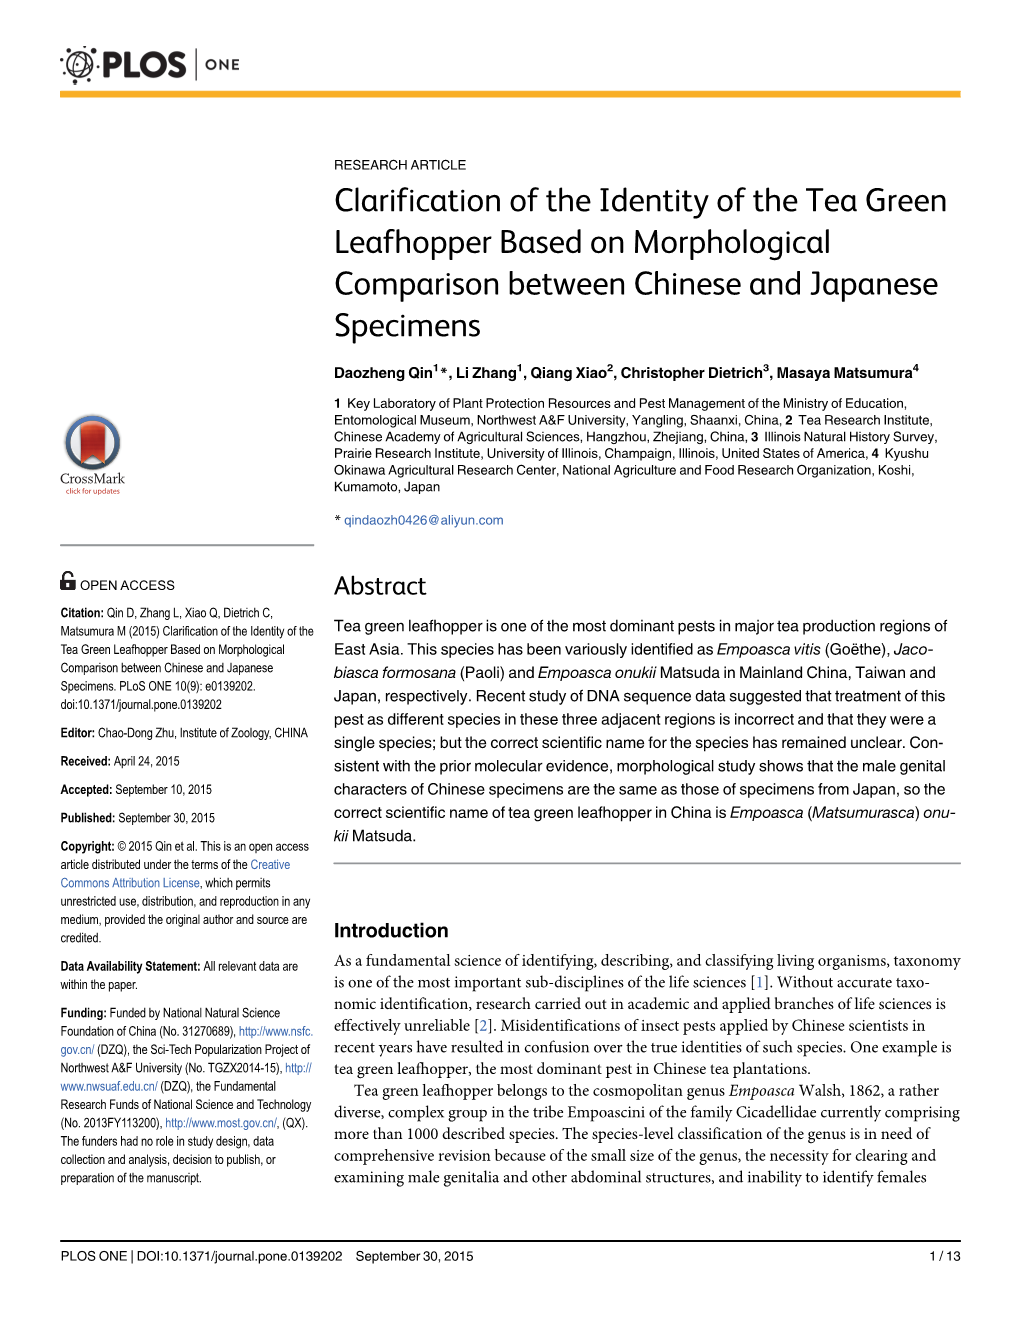 Clarification of the Identity of the Tea Green Leafhopper Based on Morphological Comparison Between Chinese and Japanese Specimens